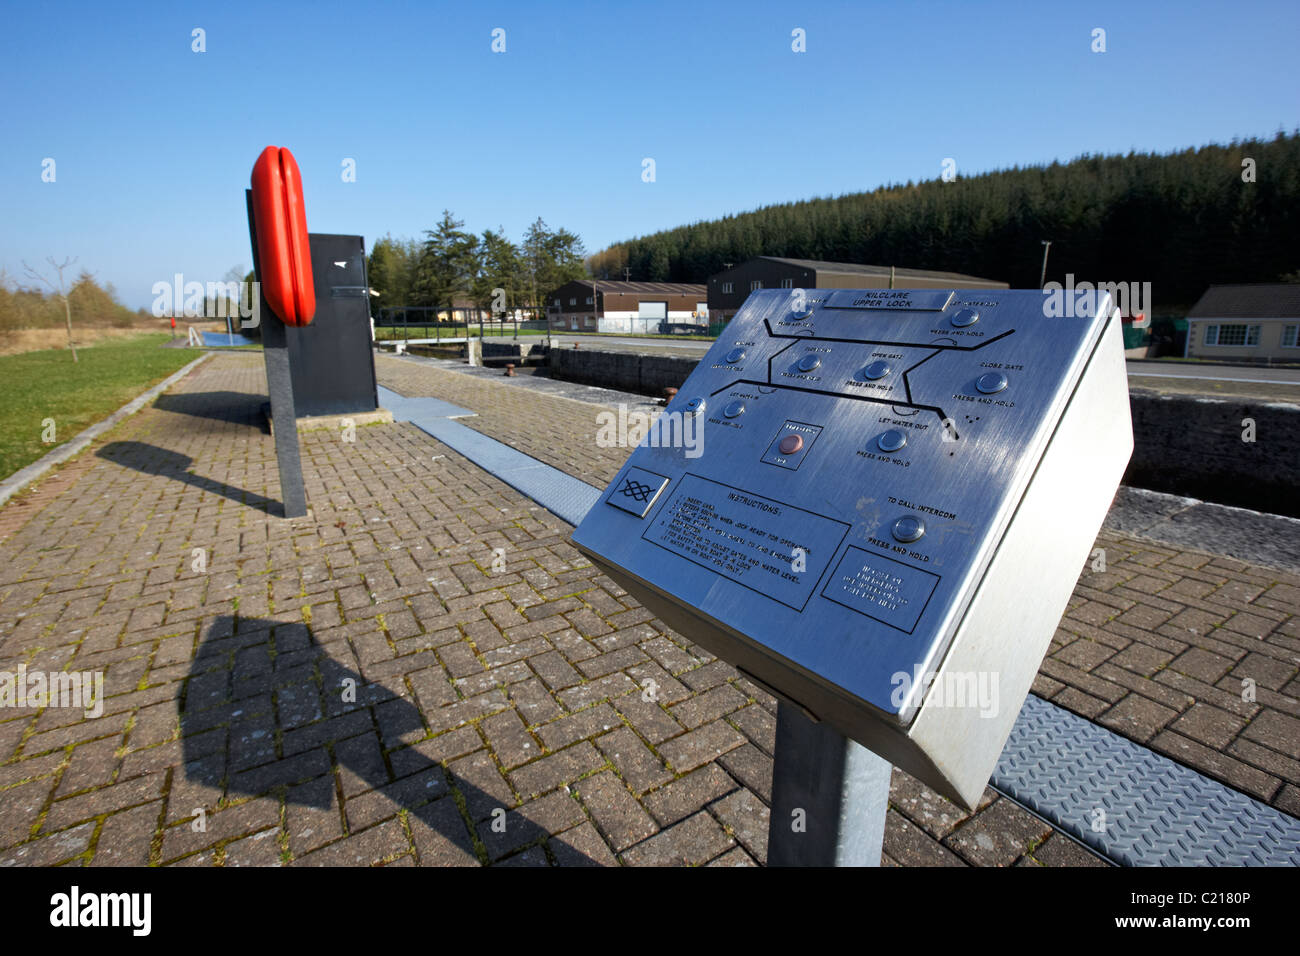 electronic lock controls for Lock 9 Kilclare Upper Lock Shannon-Erne Waterway County Leitrim Republic of Ireland Stock Photo